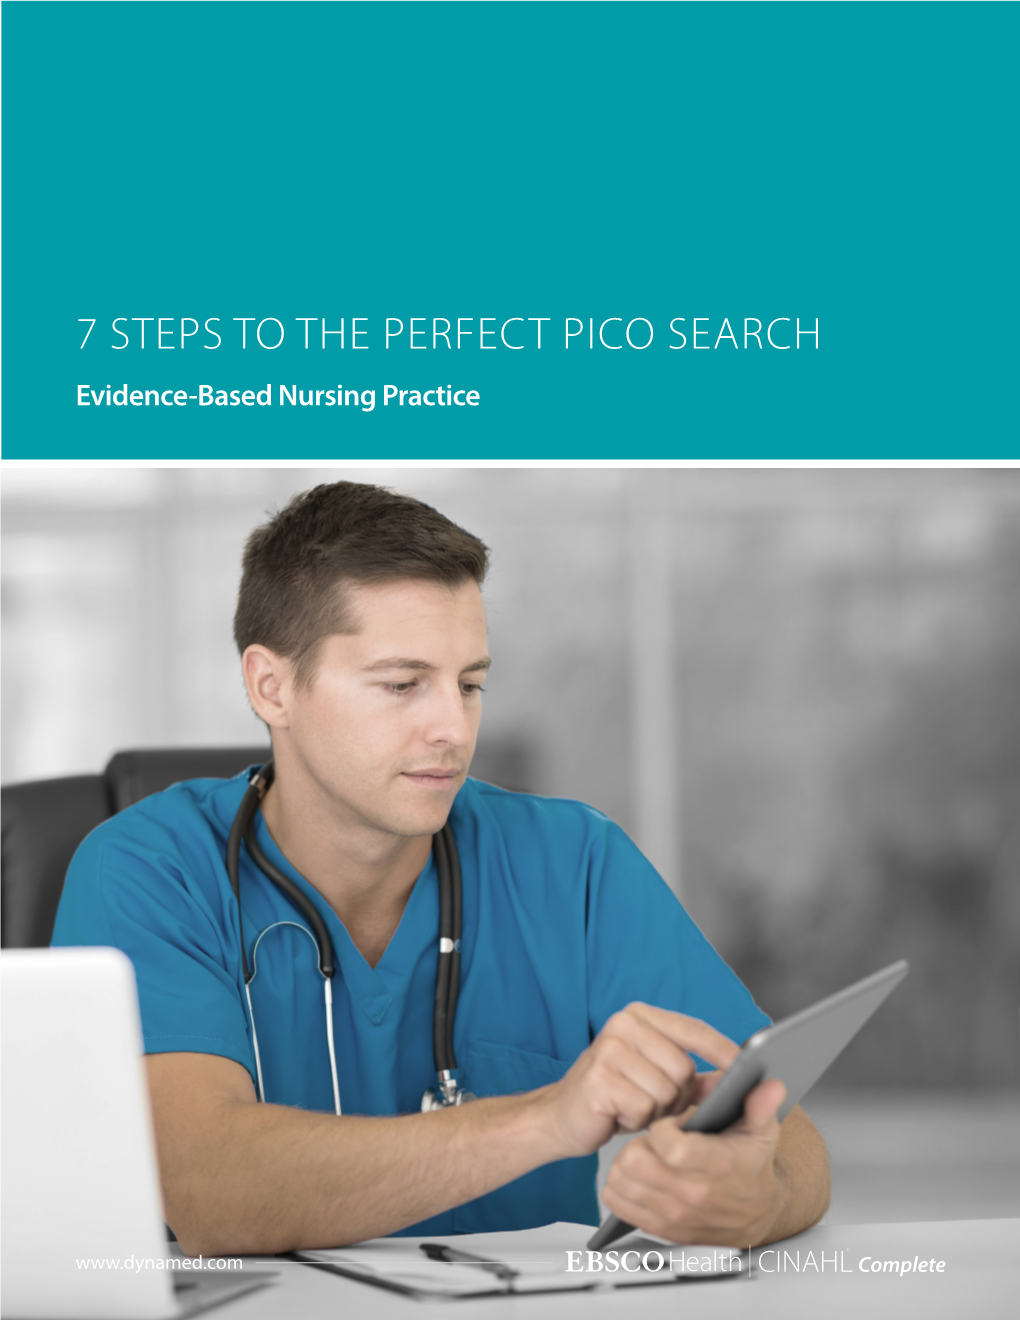 7 STEPS to the PERFECT PICO SEARCH Evidence-Based Nursing Practice